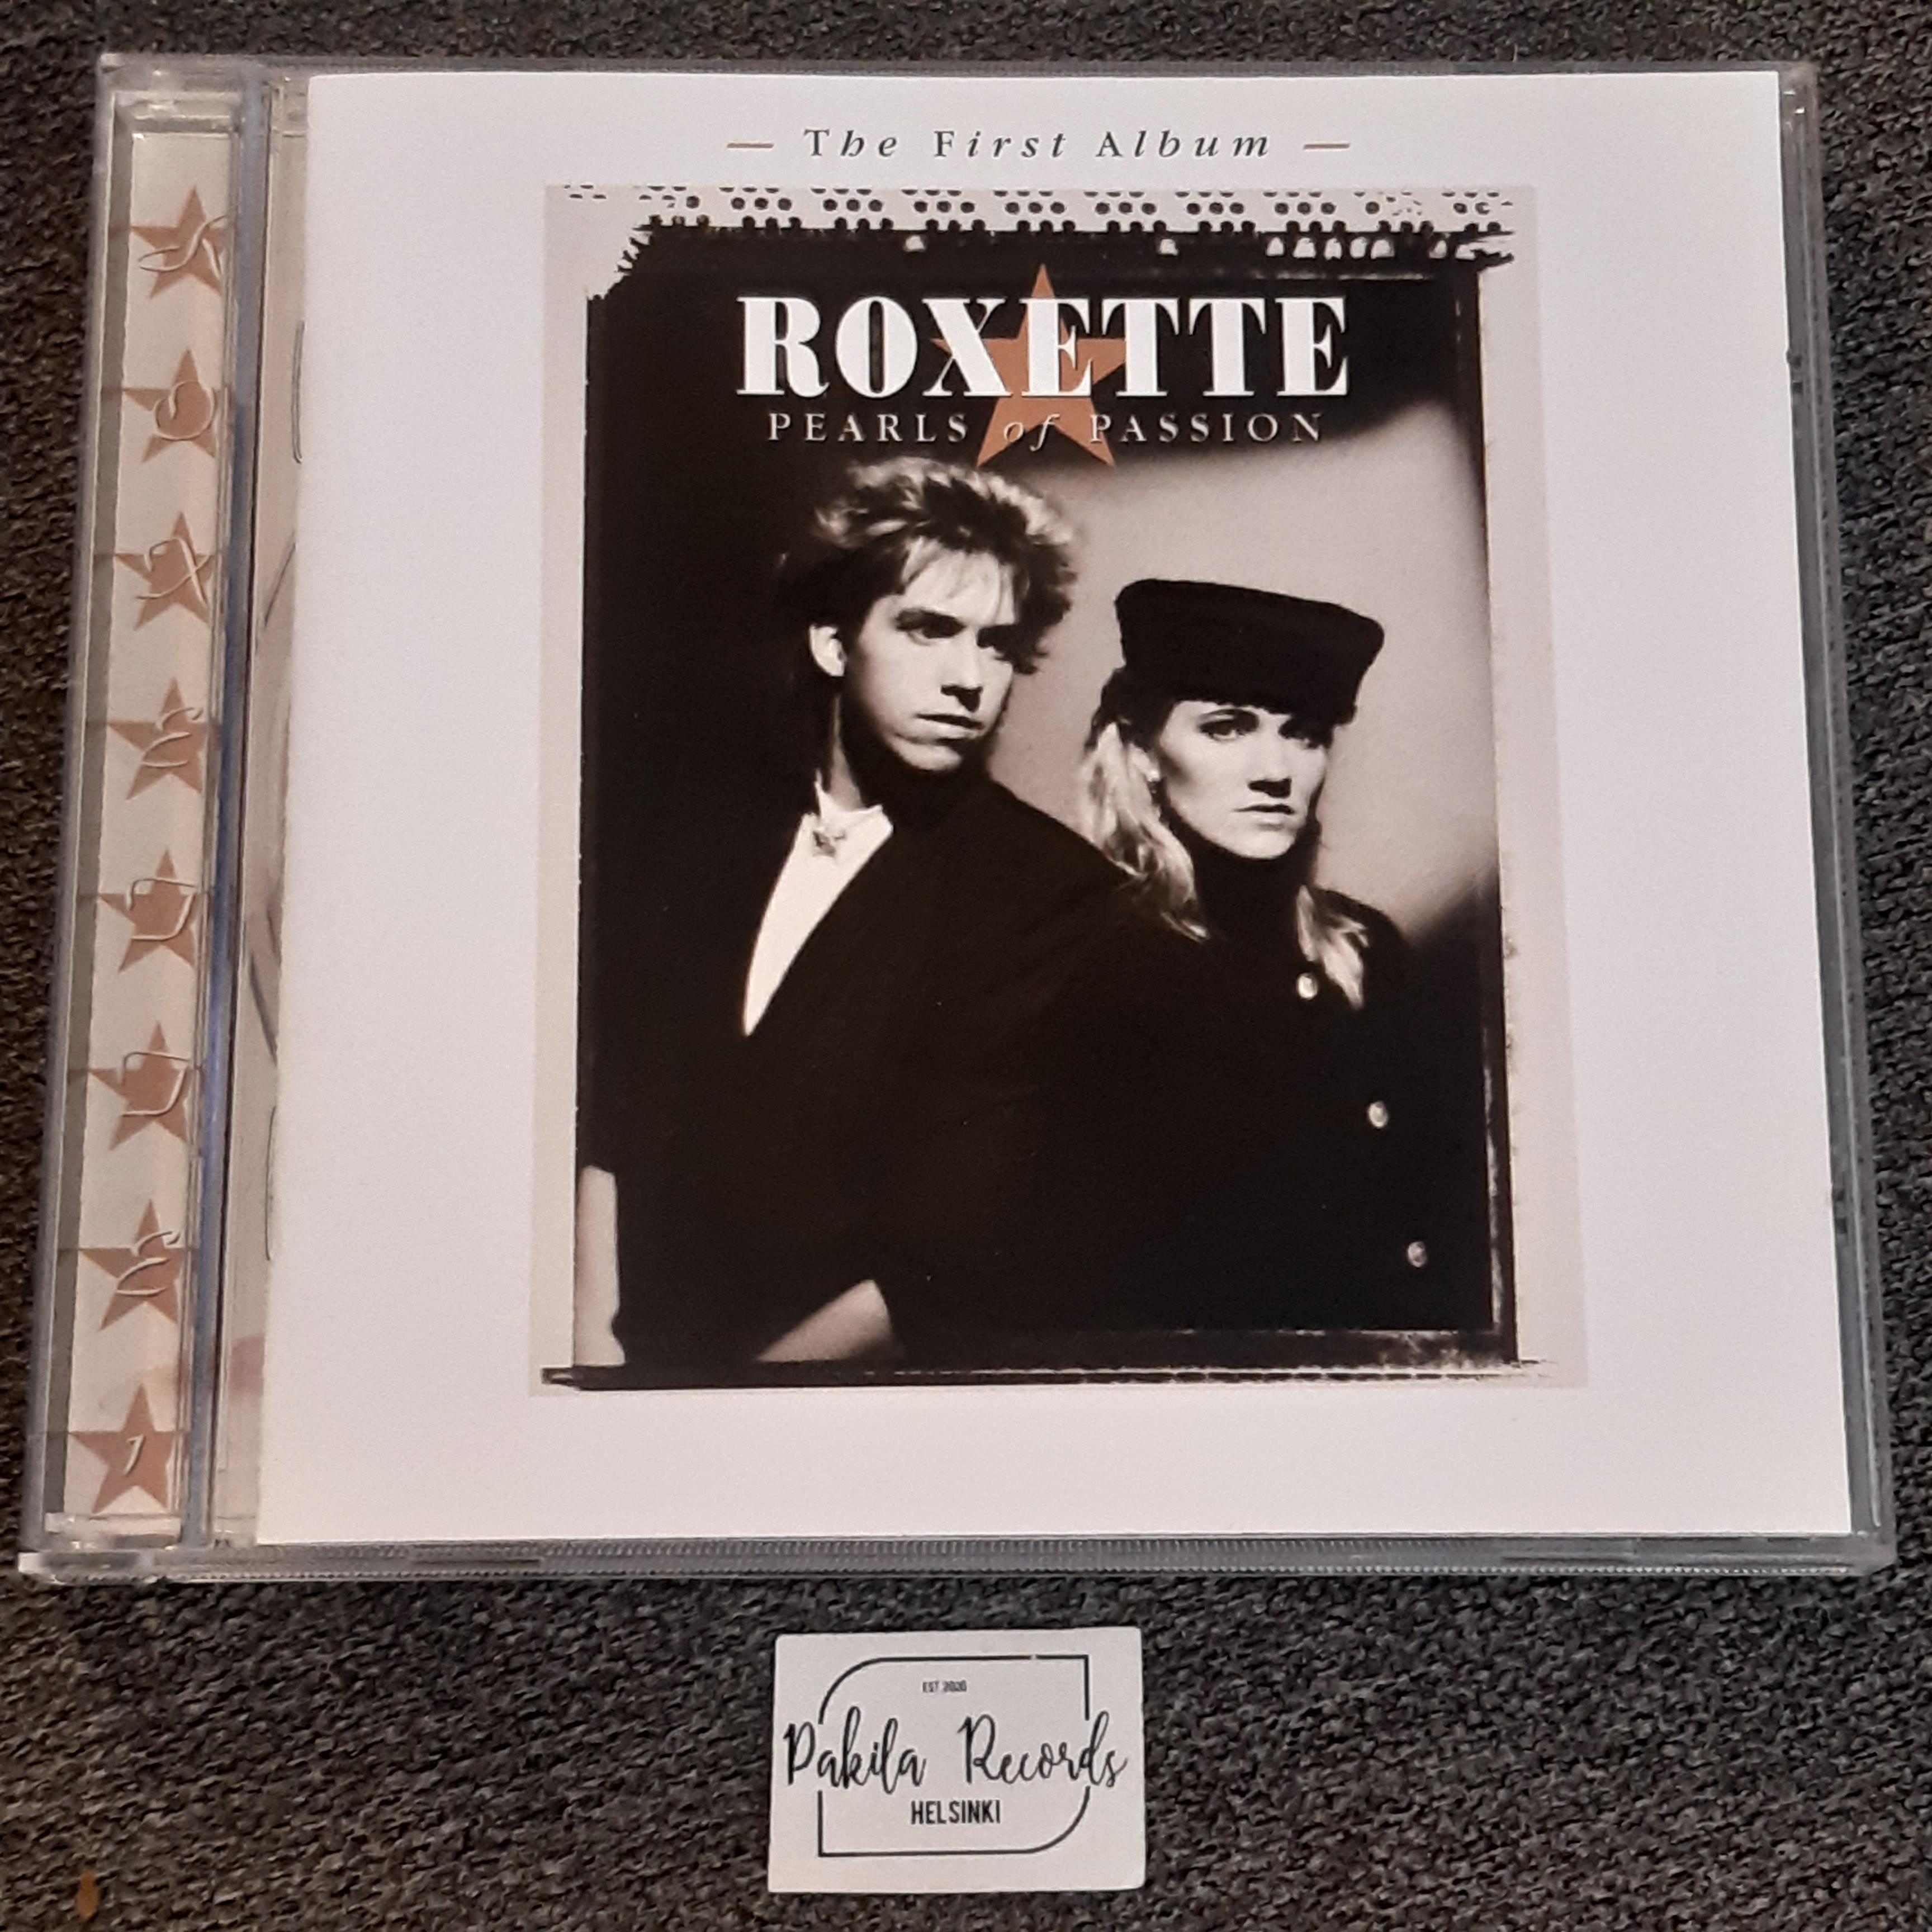 Roxette - Pearls Of Passion - CD (käytetty)